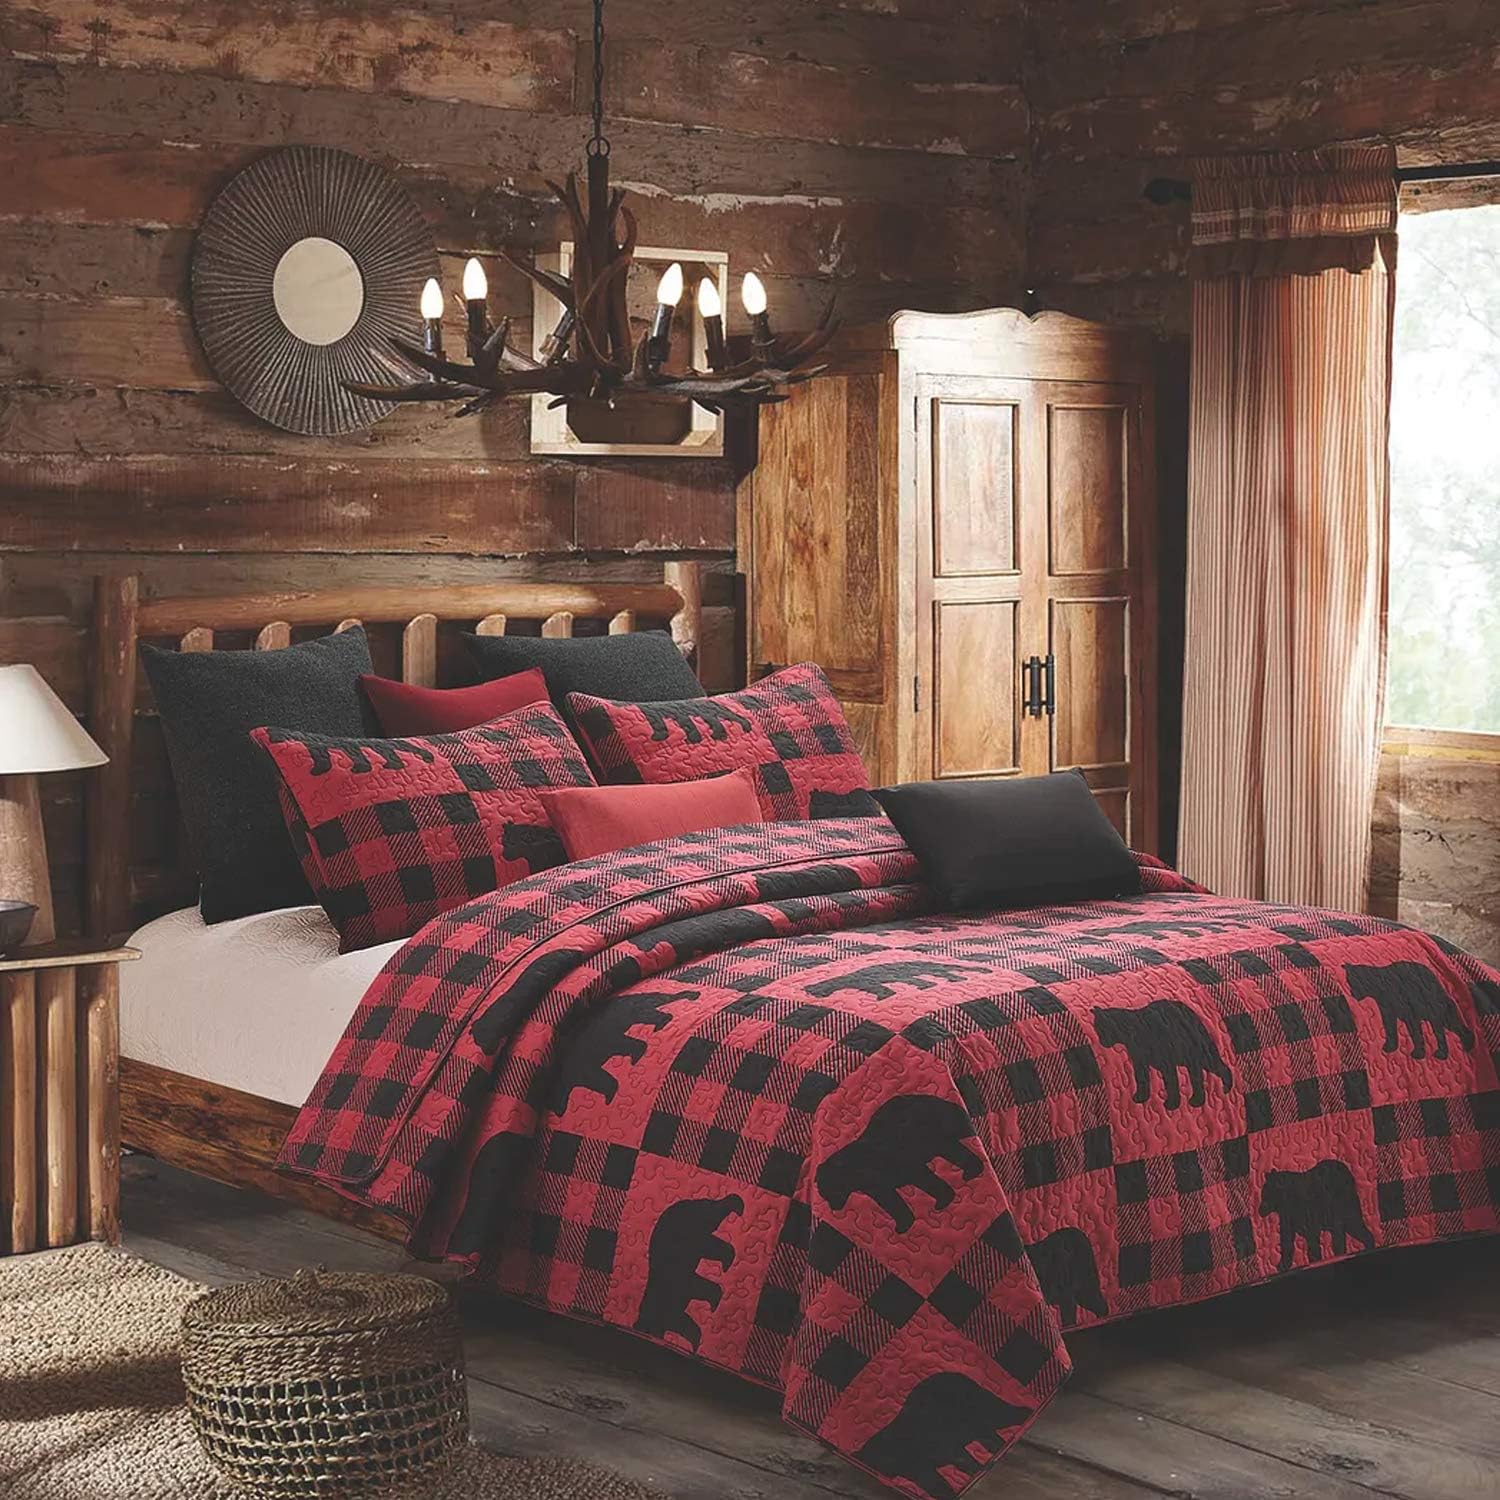 Virah Bella 3 Piece Queen Lodge Quilt Bedding Set - Buffalo Bear Plaid Red - Rustic Cabin Country Reversible Camping Comforter Set with Decorative Pillow Shams, Red/Black